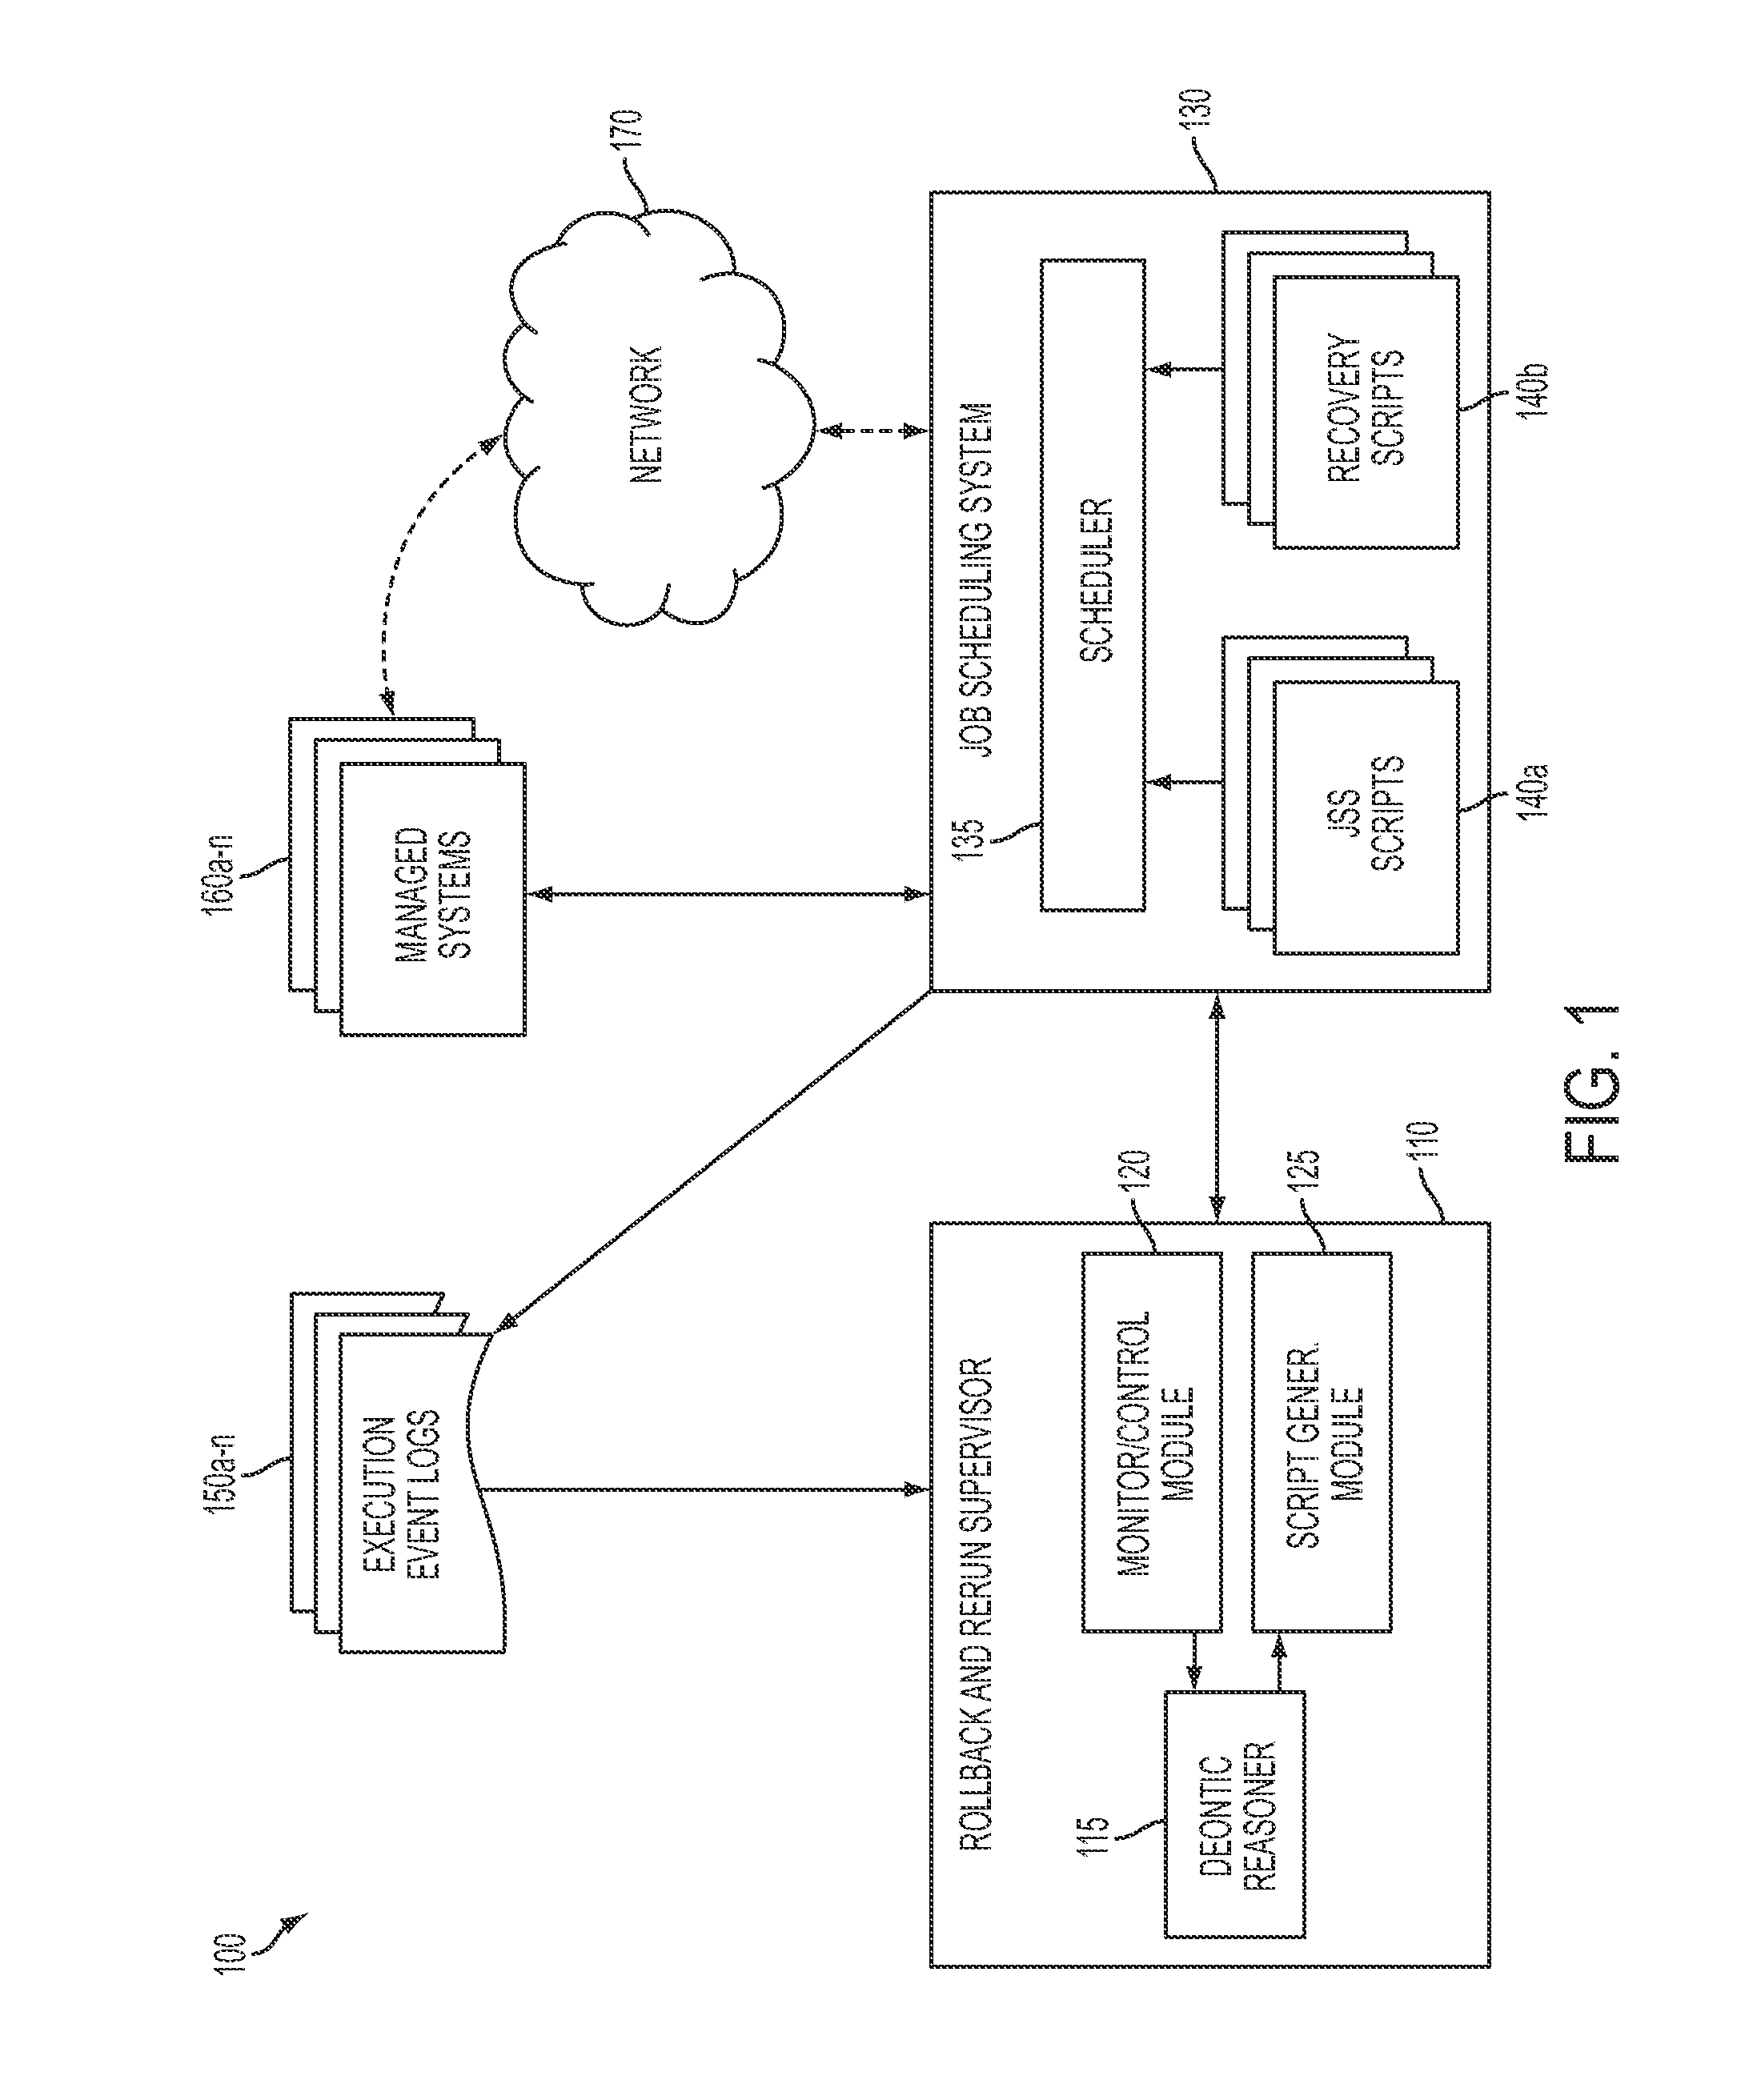 System and method for modifying execution of scripts for a job scheduler using deontic logic